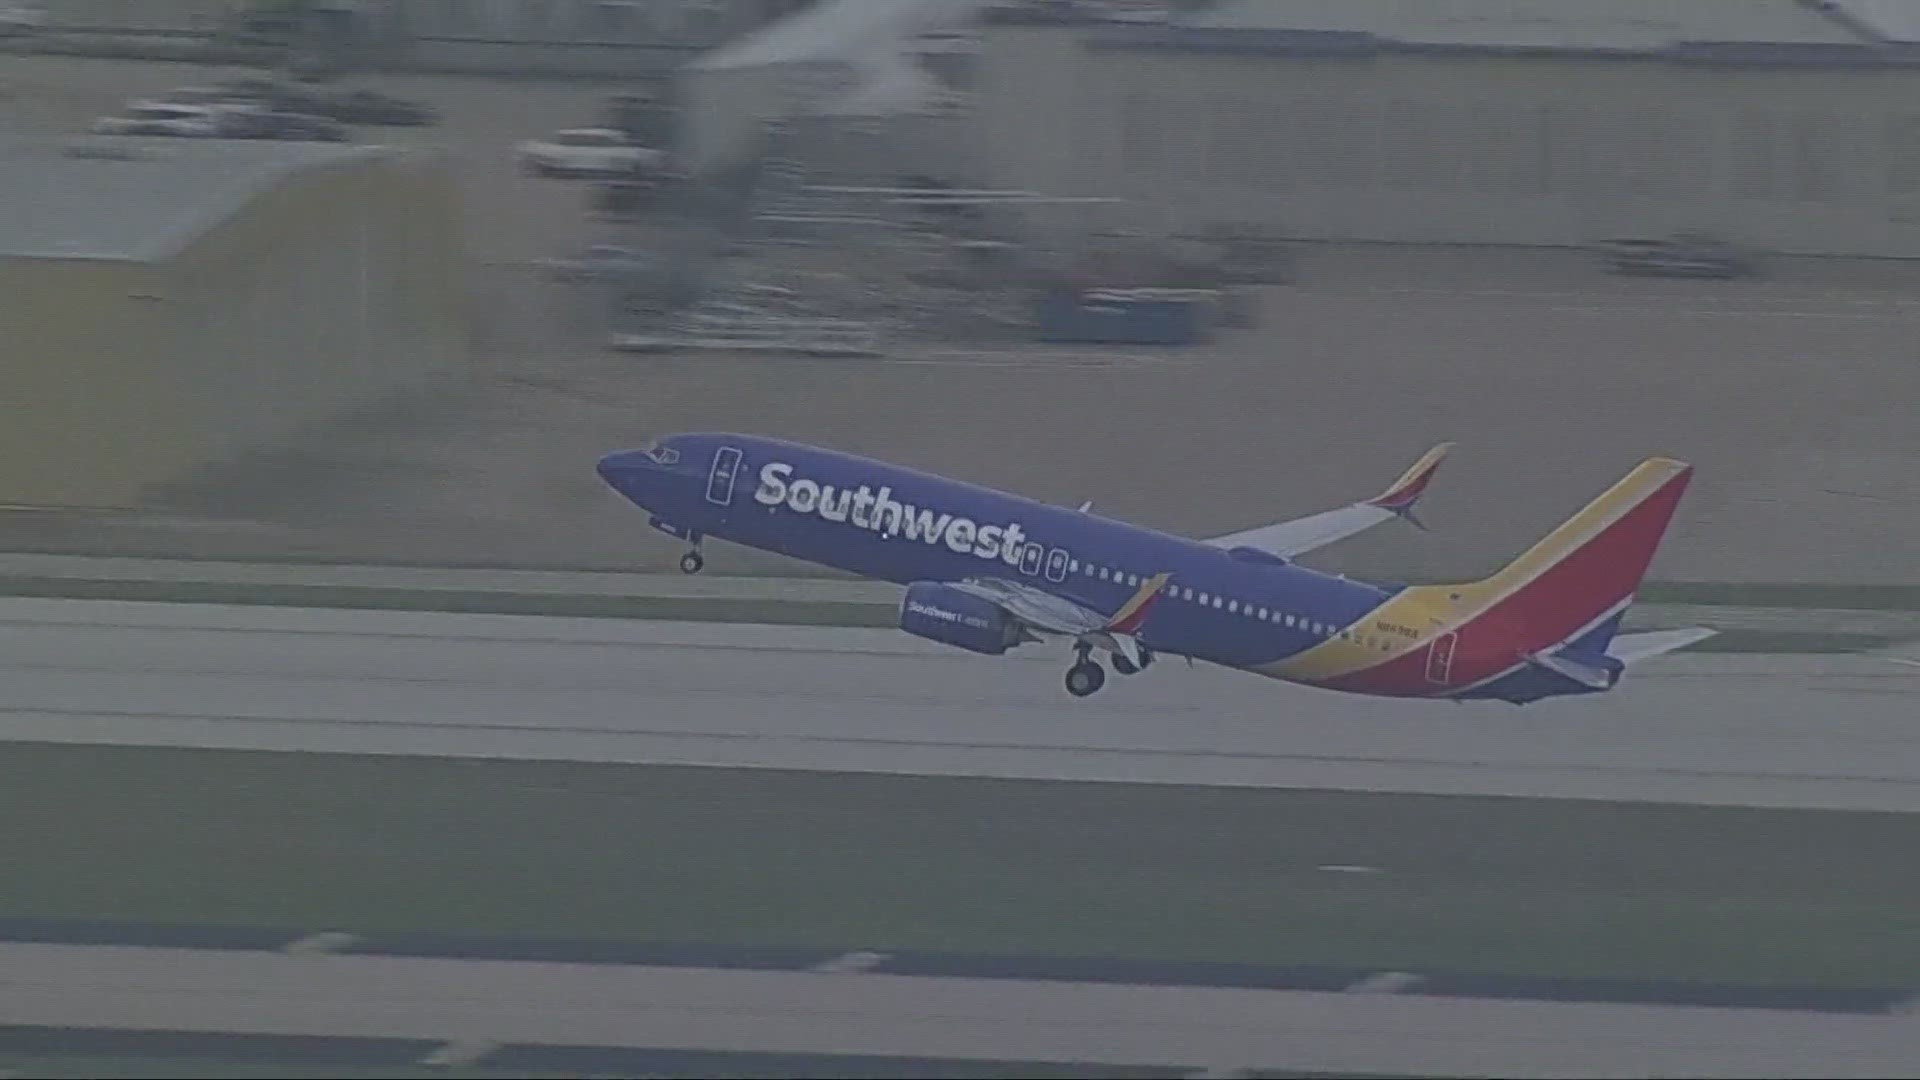 More than 1,700 Southwest flights have already been delayed Tuesday, according to flight tracking website FlightAware.